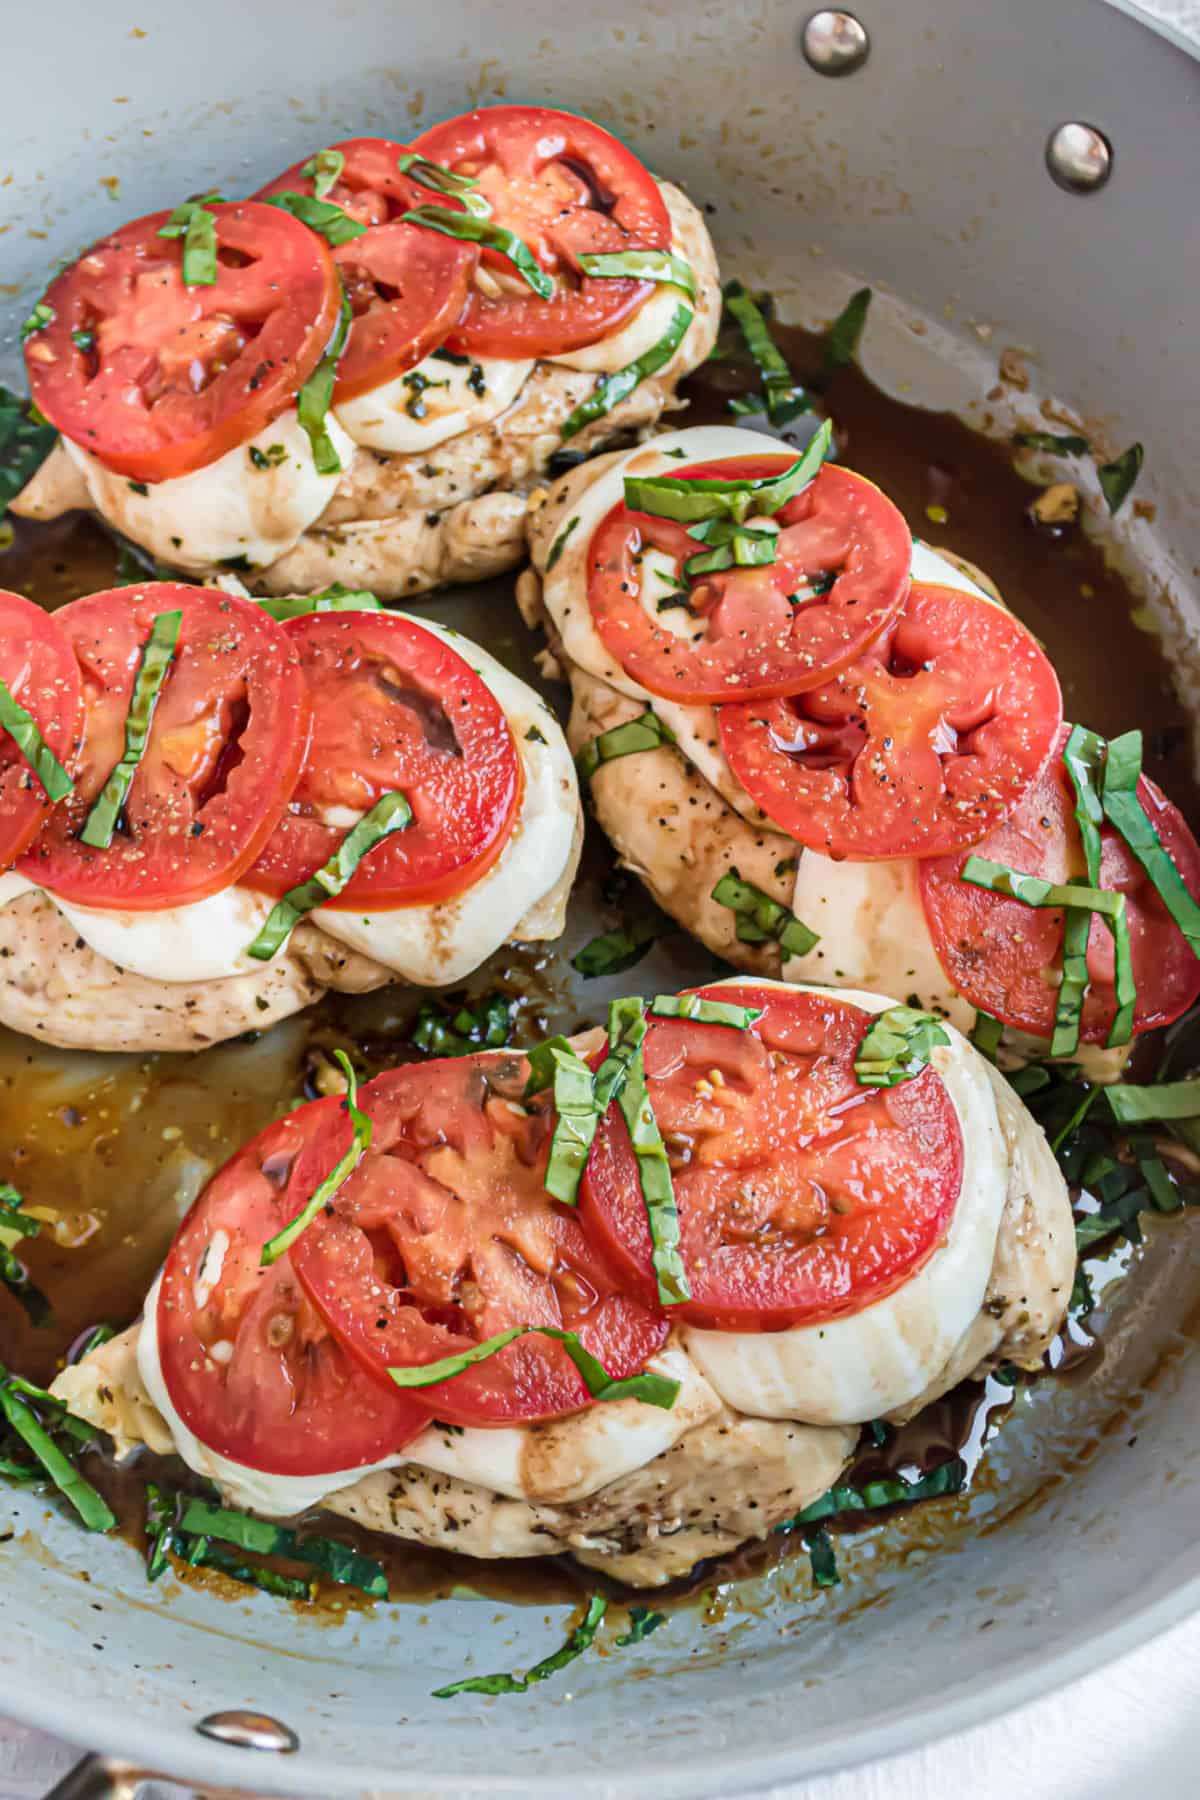 Skillet with chicken, tomatoes, cheese, and basil.